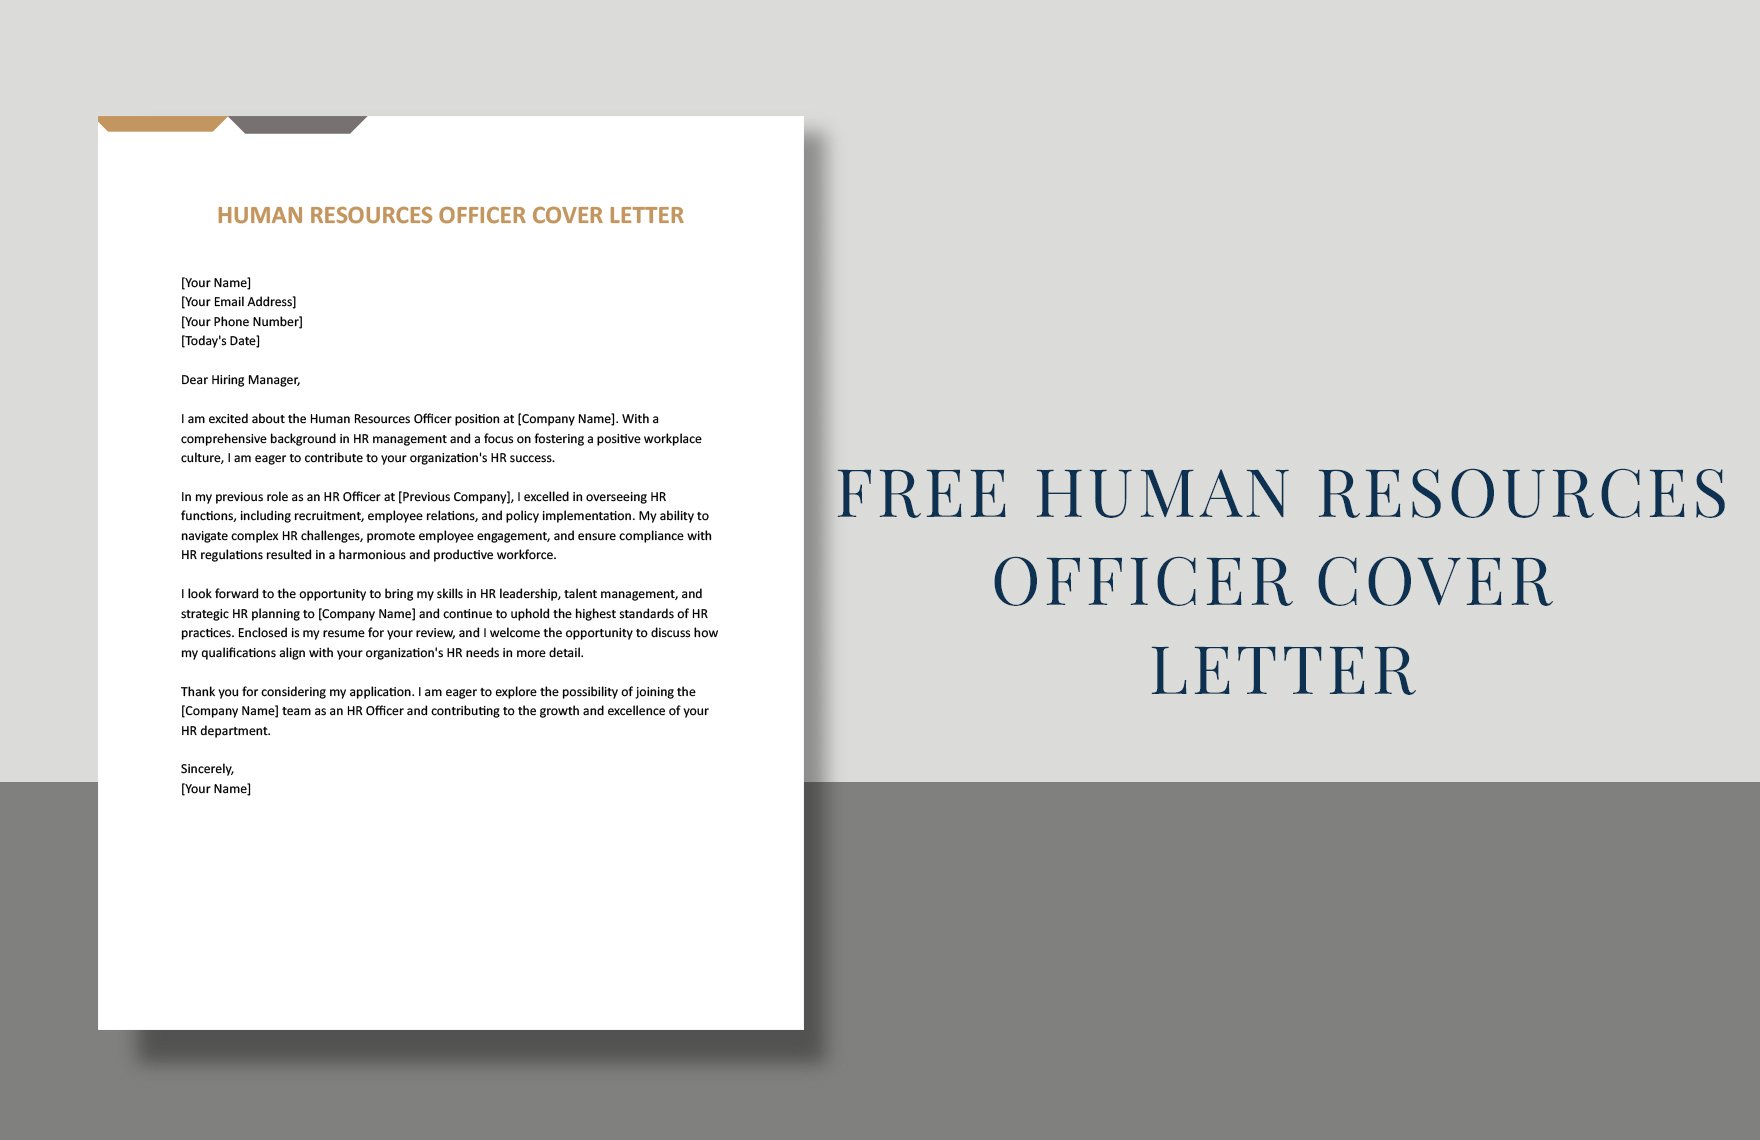 Human Resources Officer Cover Letter